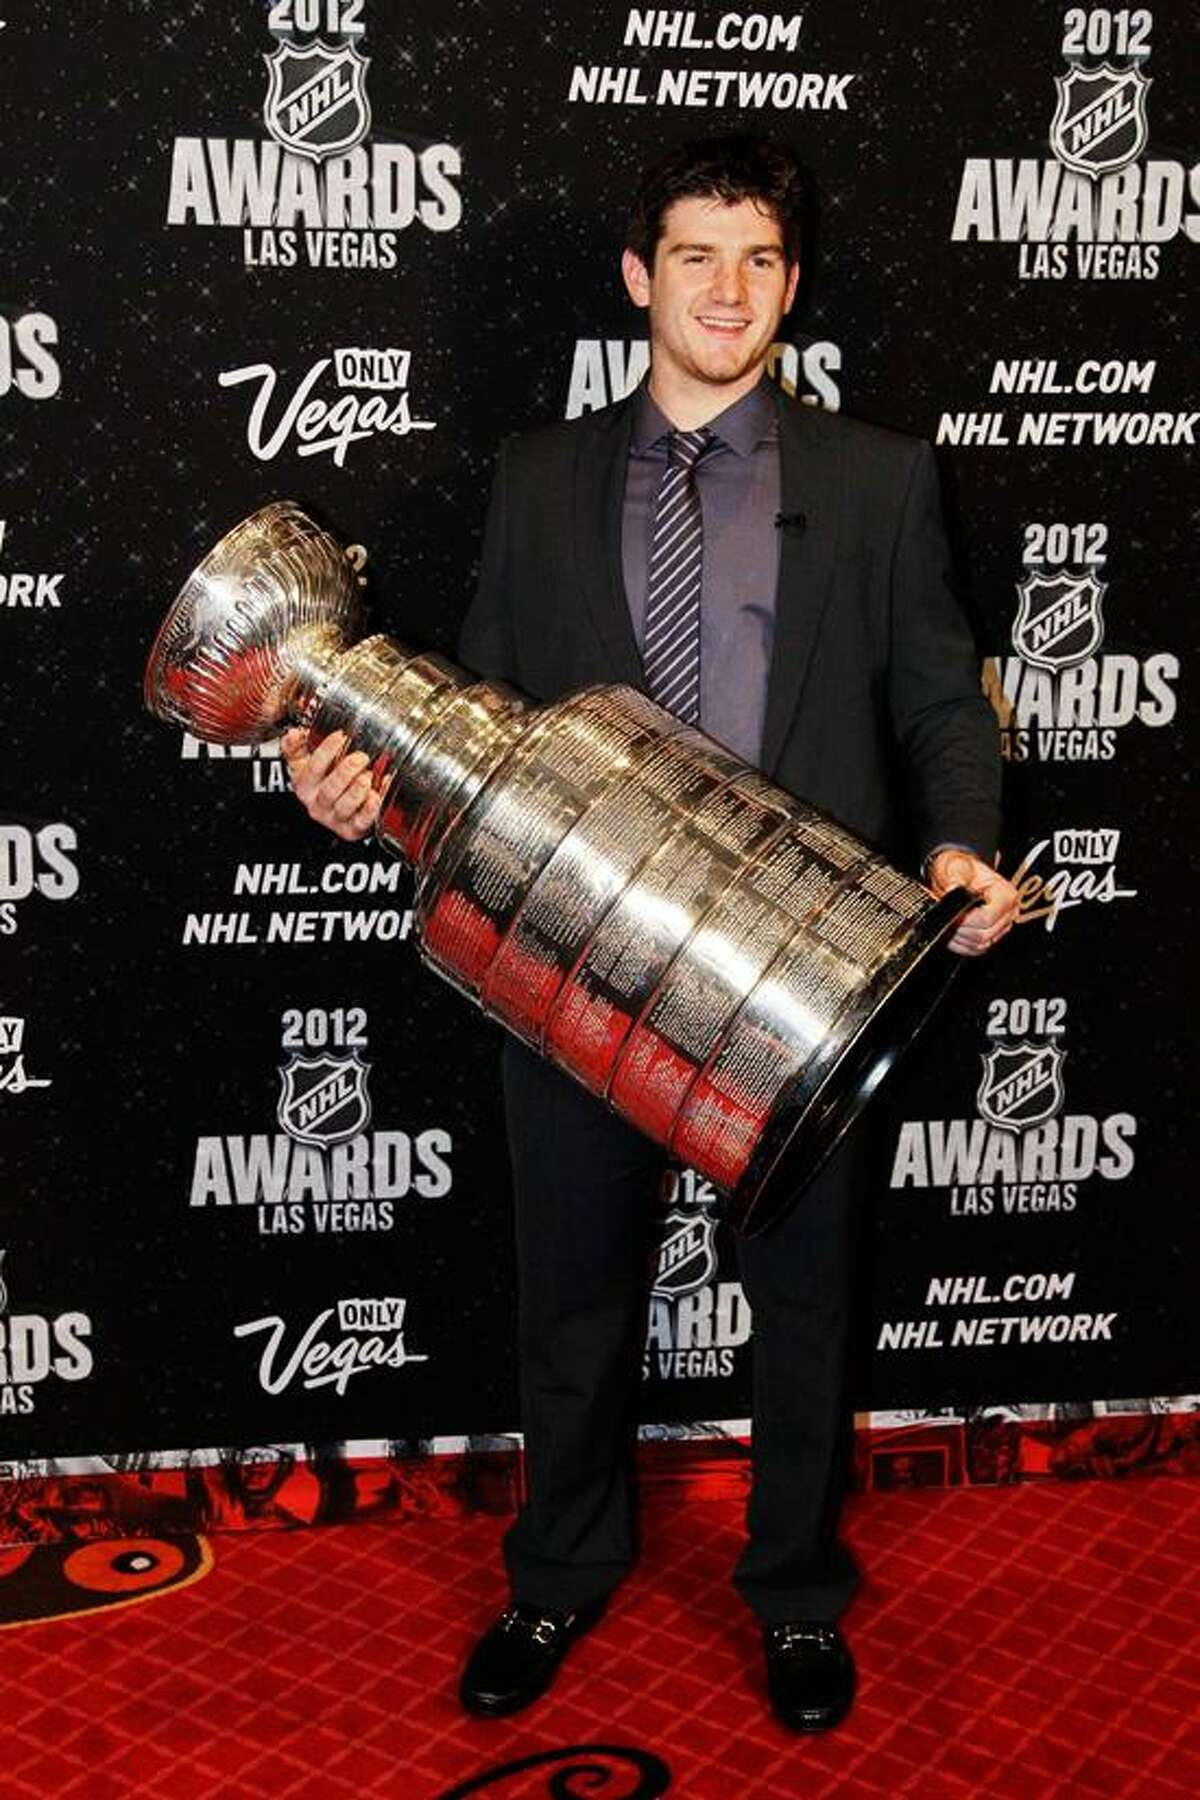 Los Angeles Kings' Jonathan Quick poses with the Stanley Cup before the start of the NHL Awards, Wednesday, June 20, 2012, in Las Vegas. (AP Photo/Julie Jacobson)